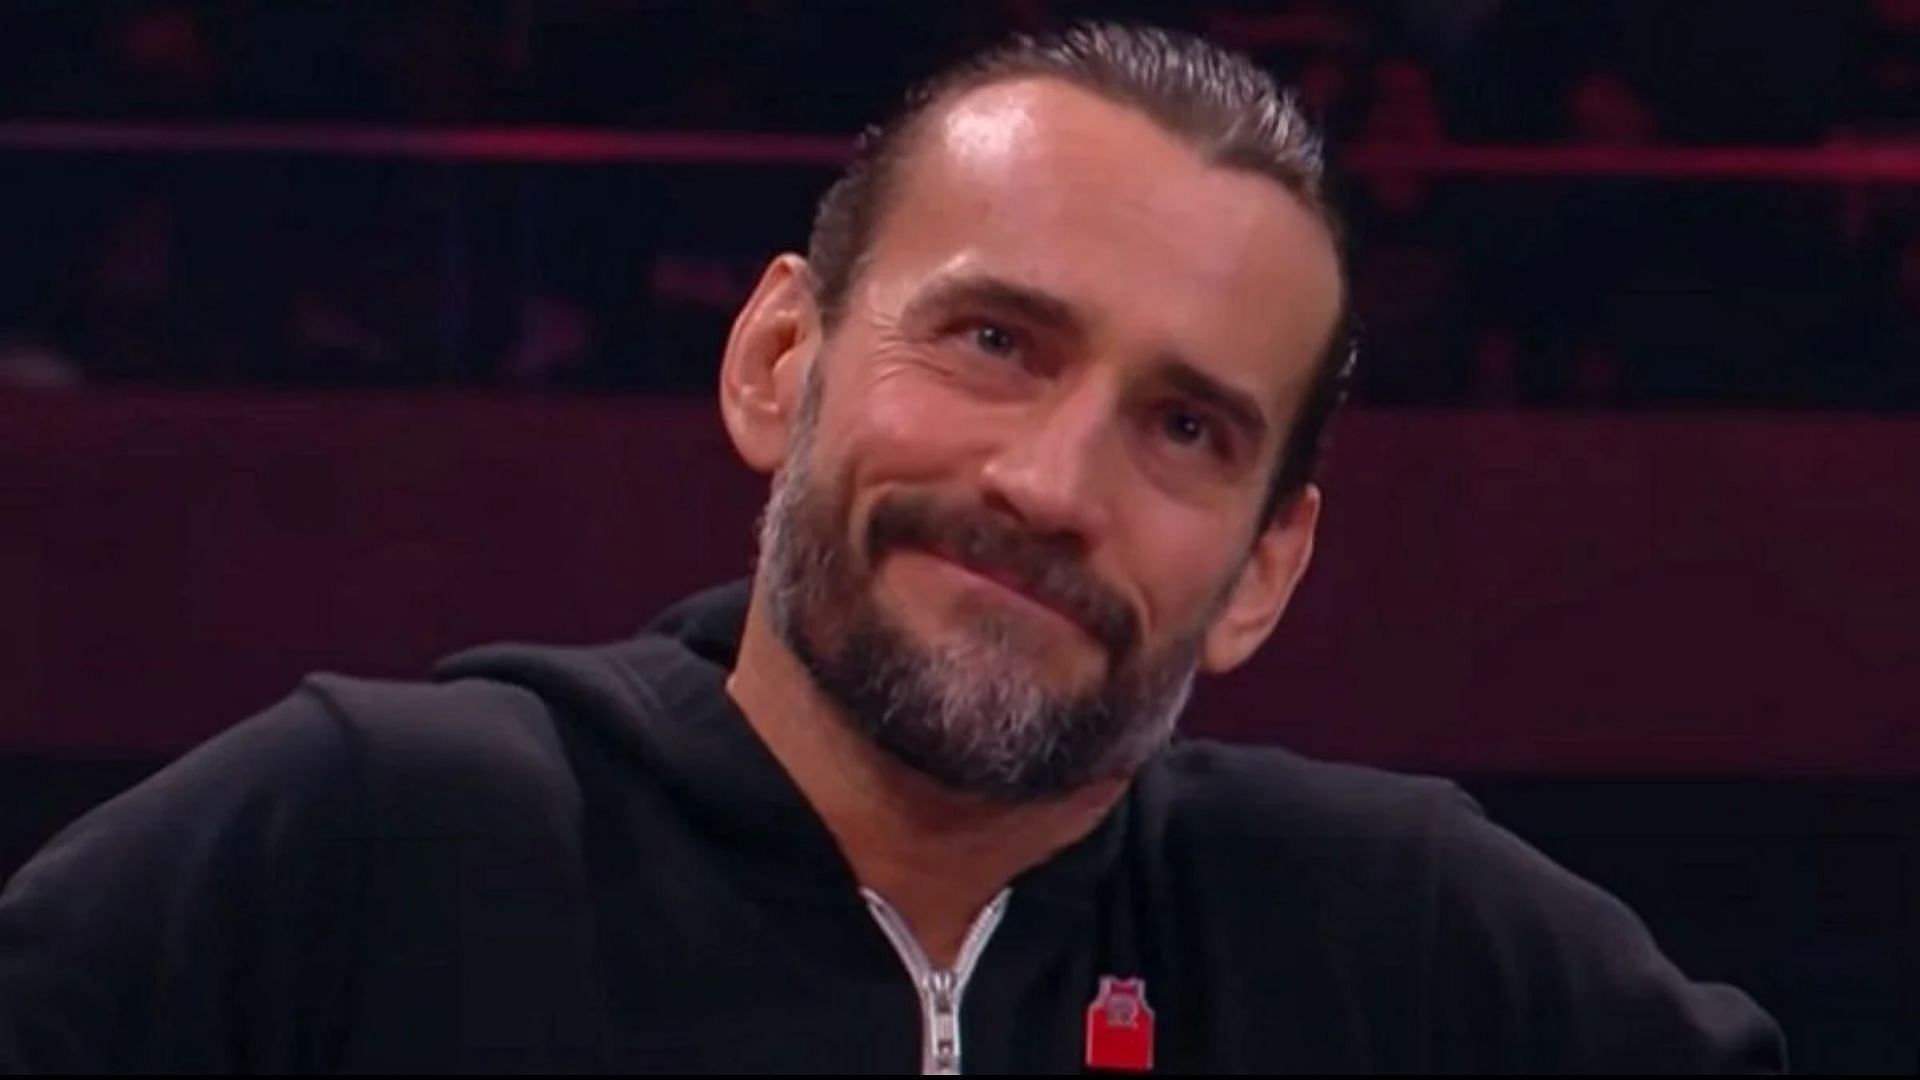 CM Punk is a former AEW World Champion who is now with WWE